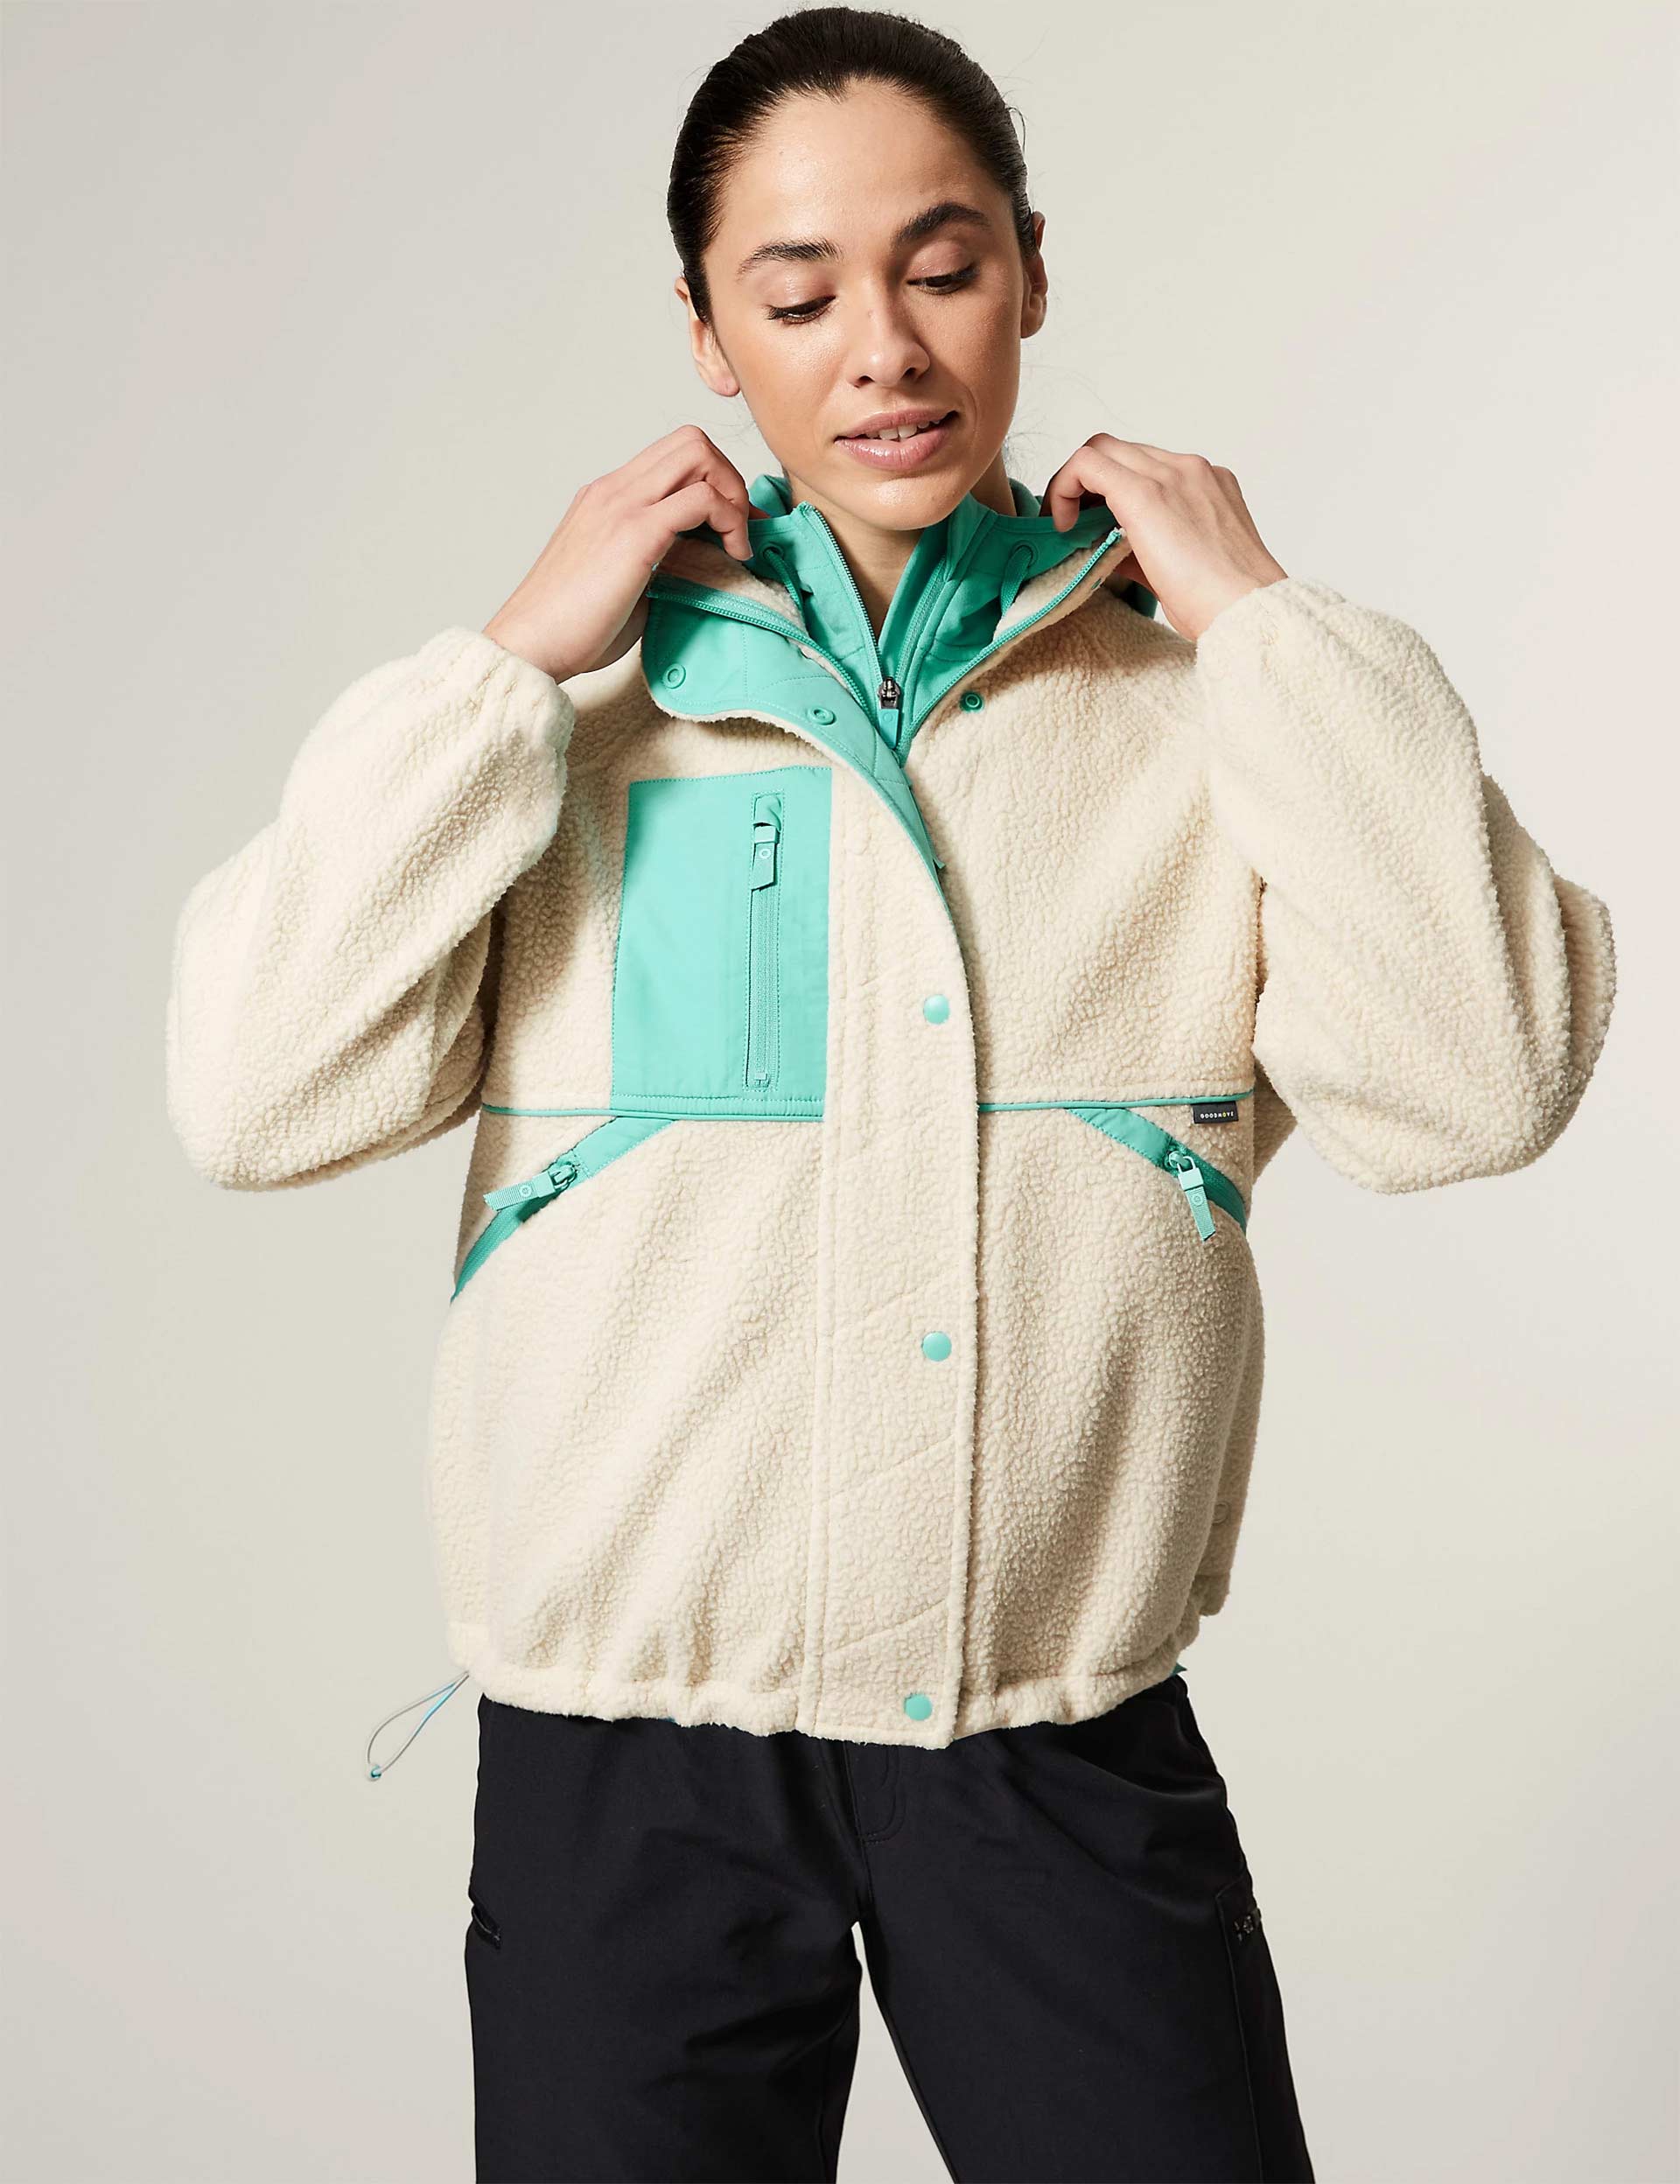 Find your perfect fleece jacket here